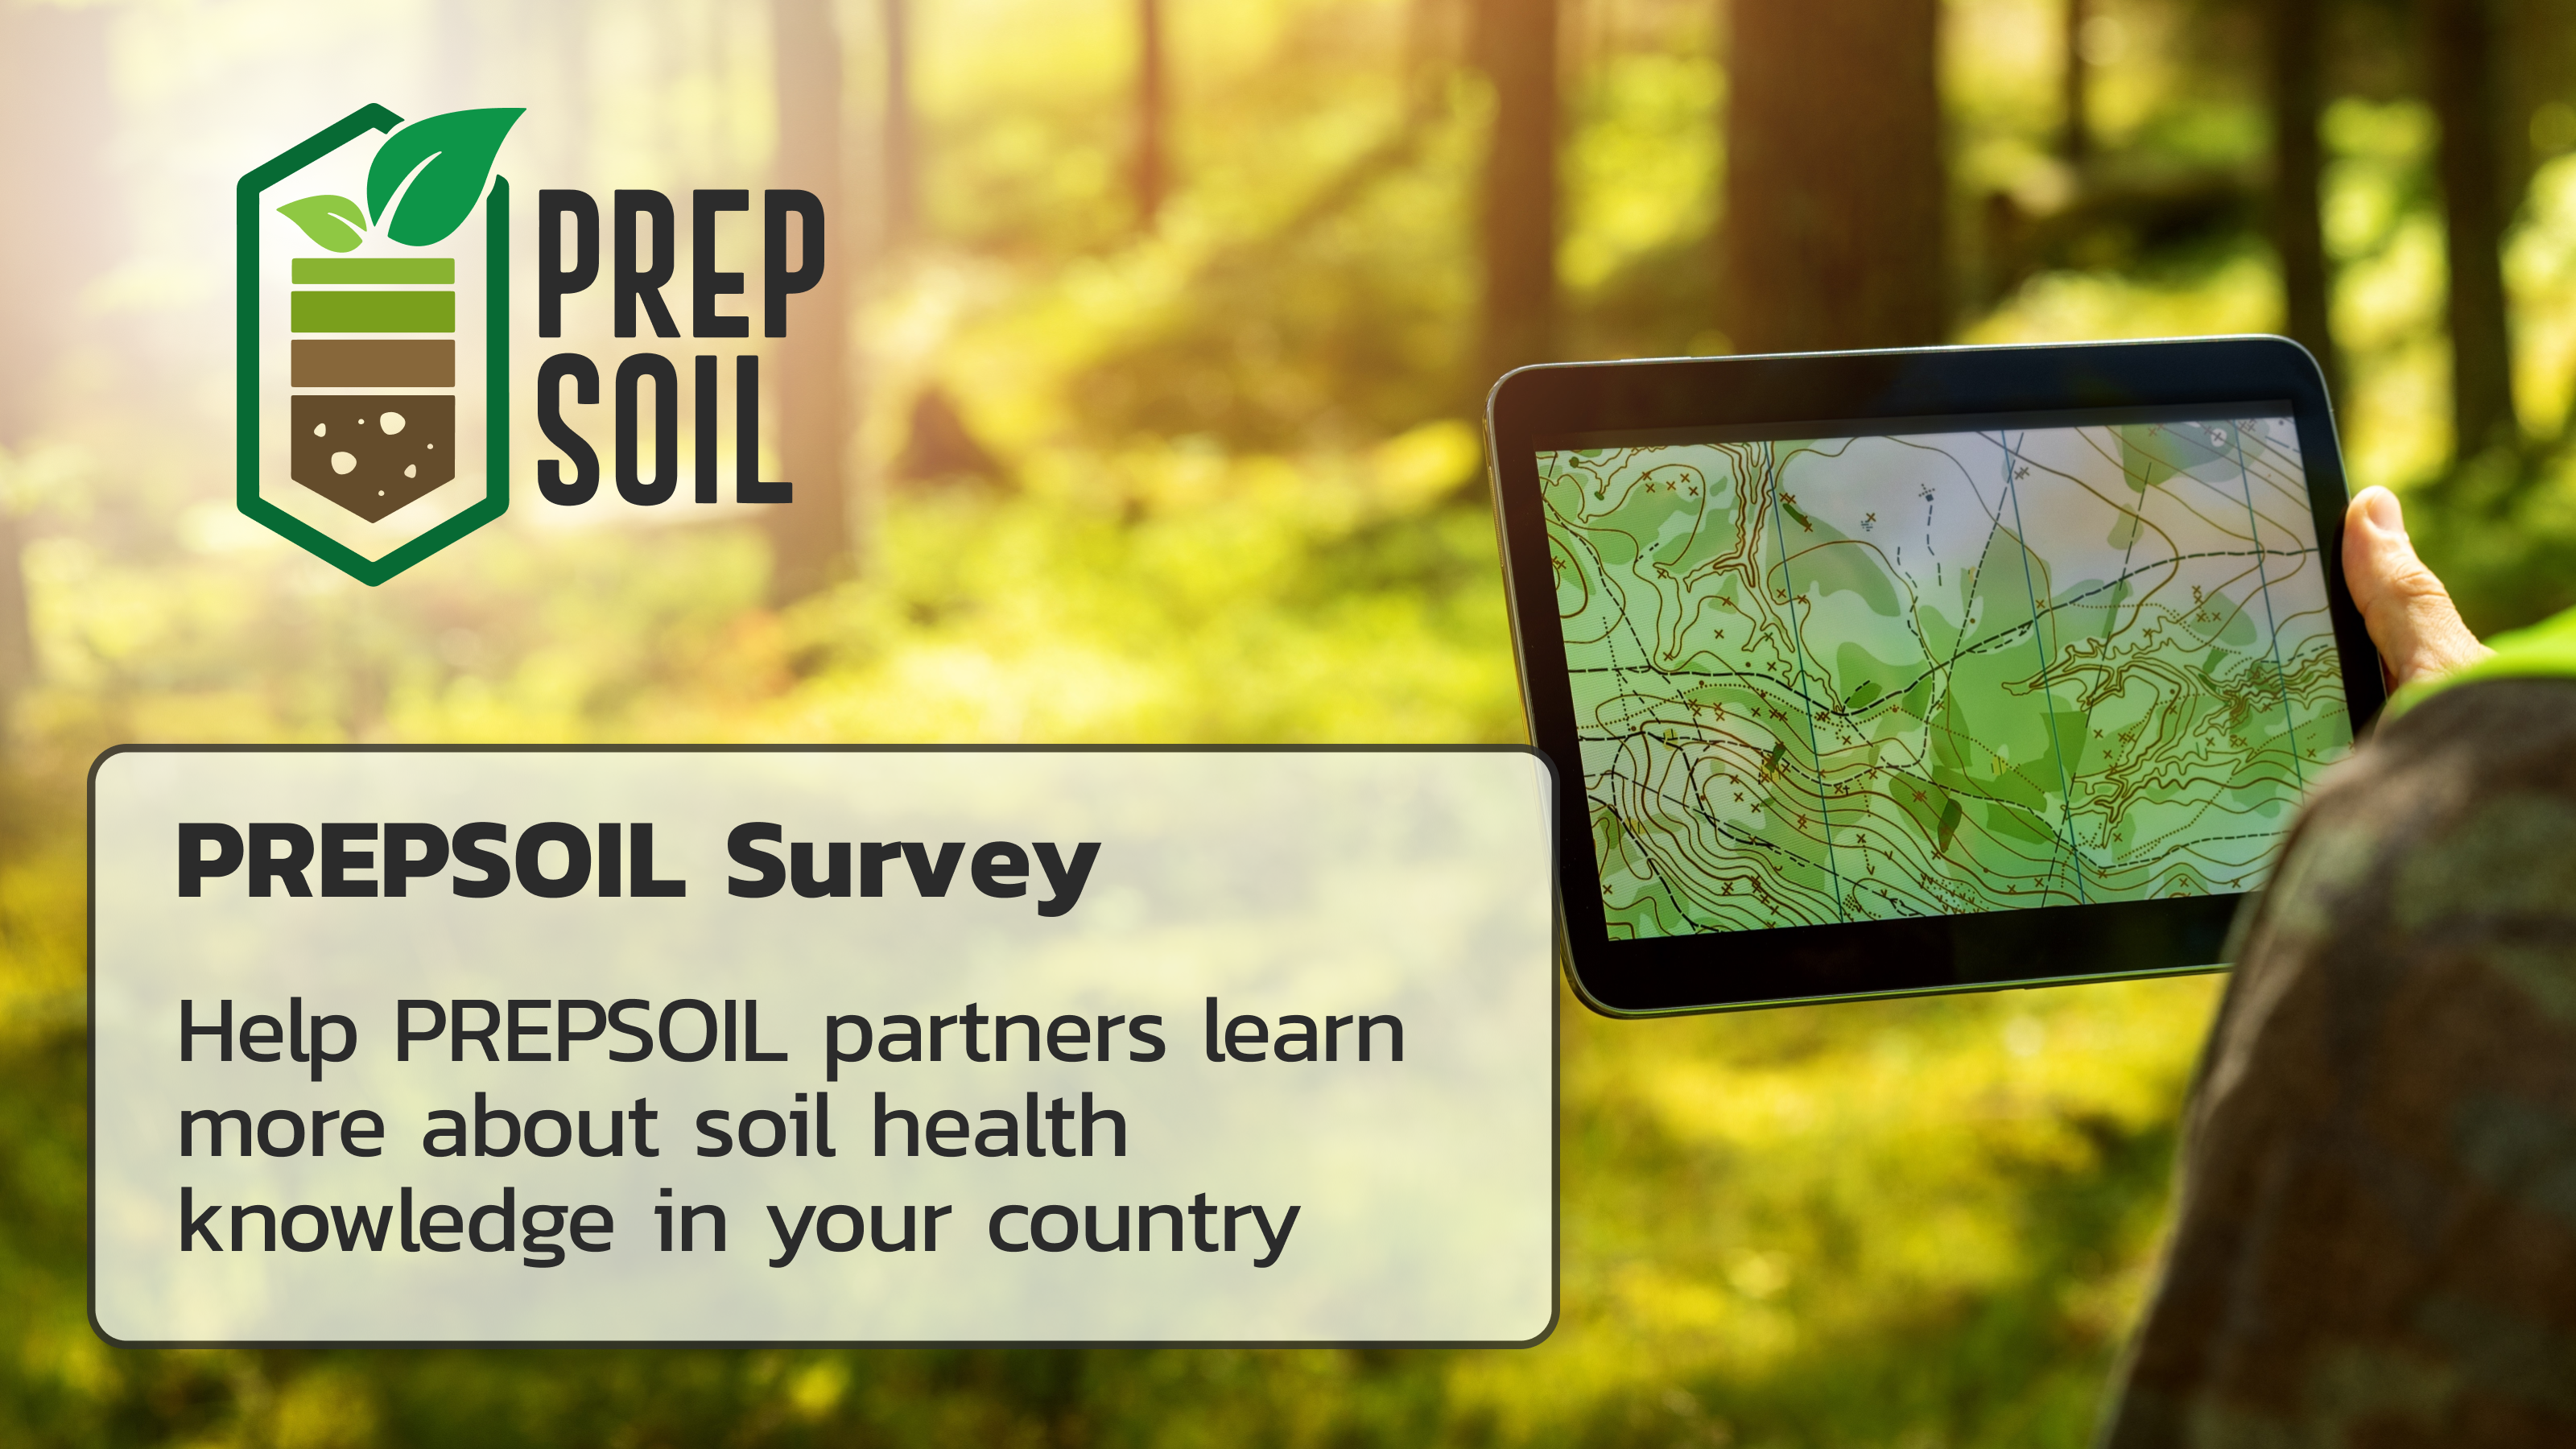 SURVEY: Help PREPSOIL partners learn more about soil health knowledge in your country